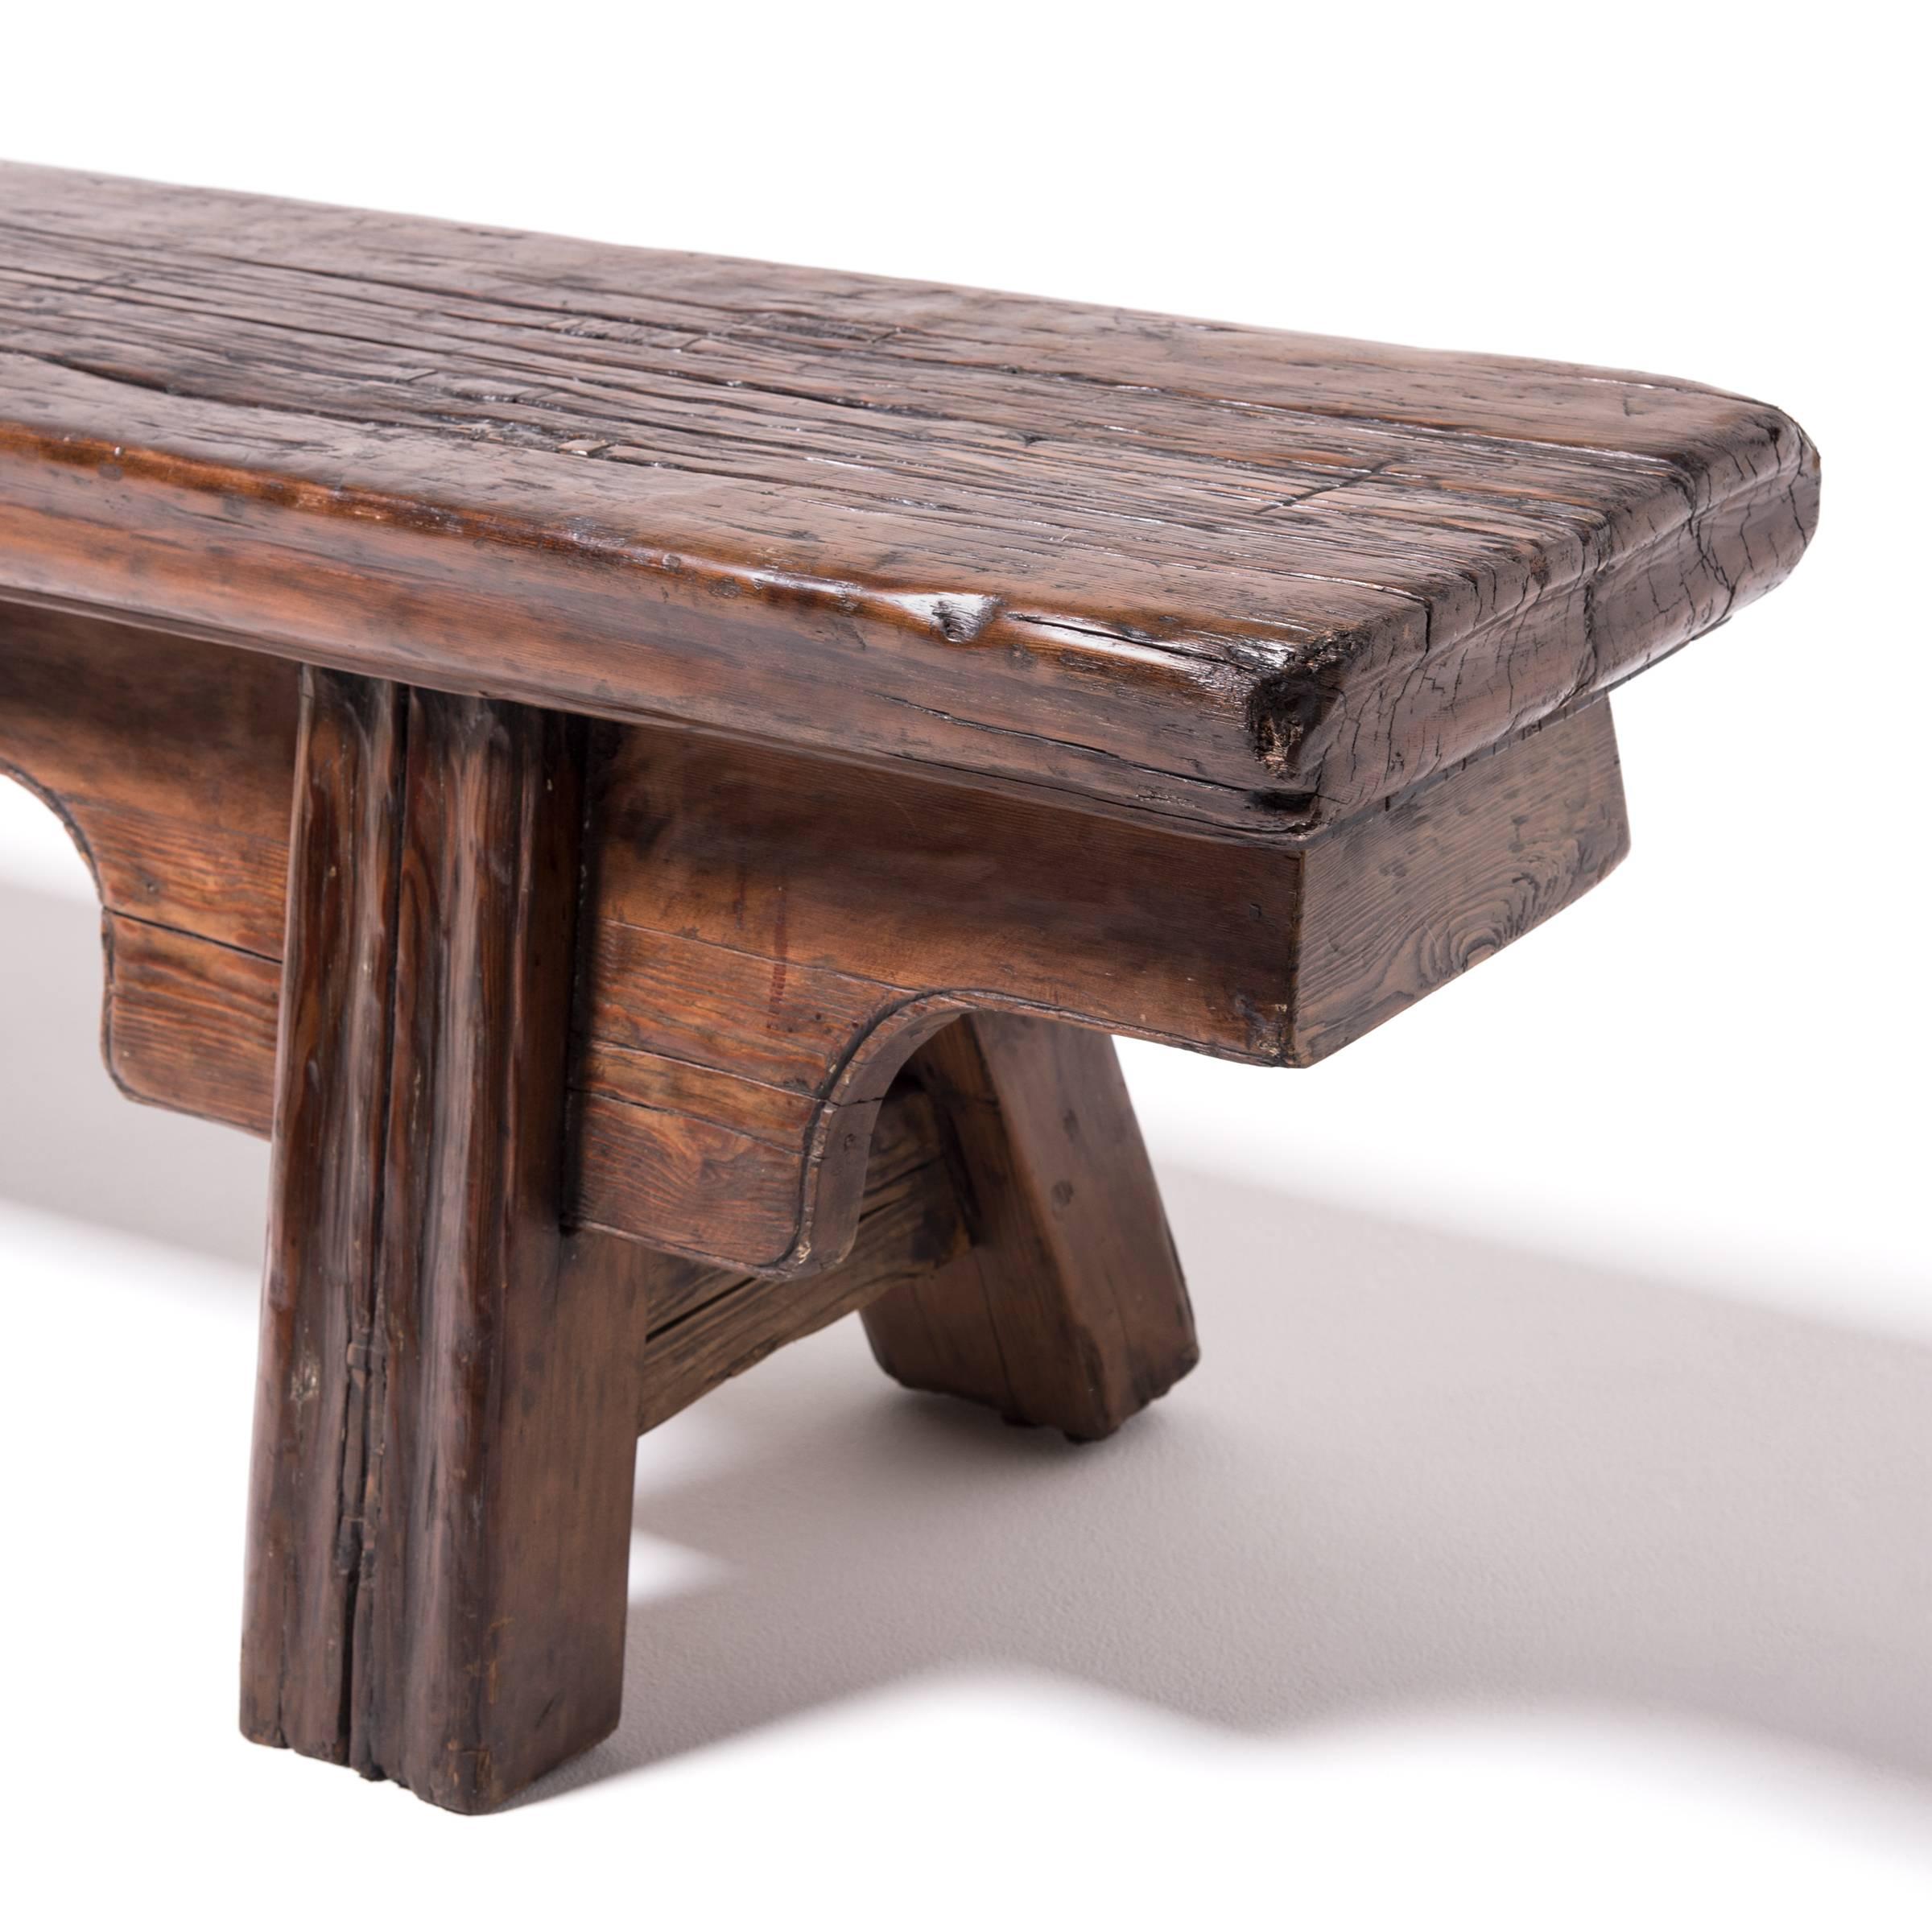 19th Century Provincial Chinese Elmwood Bench, c. 1850 For Sale